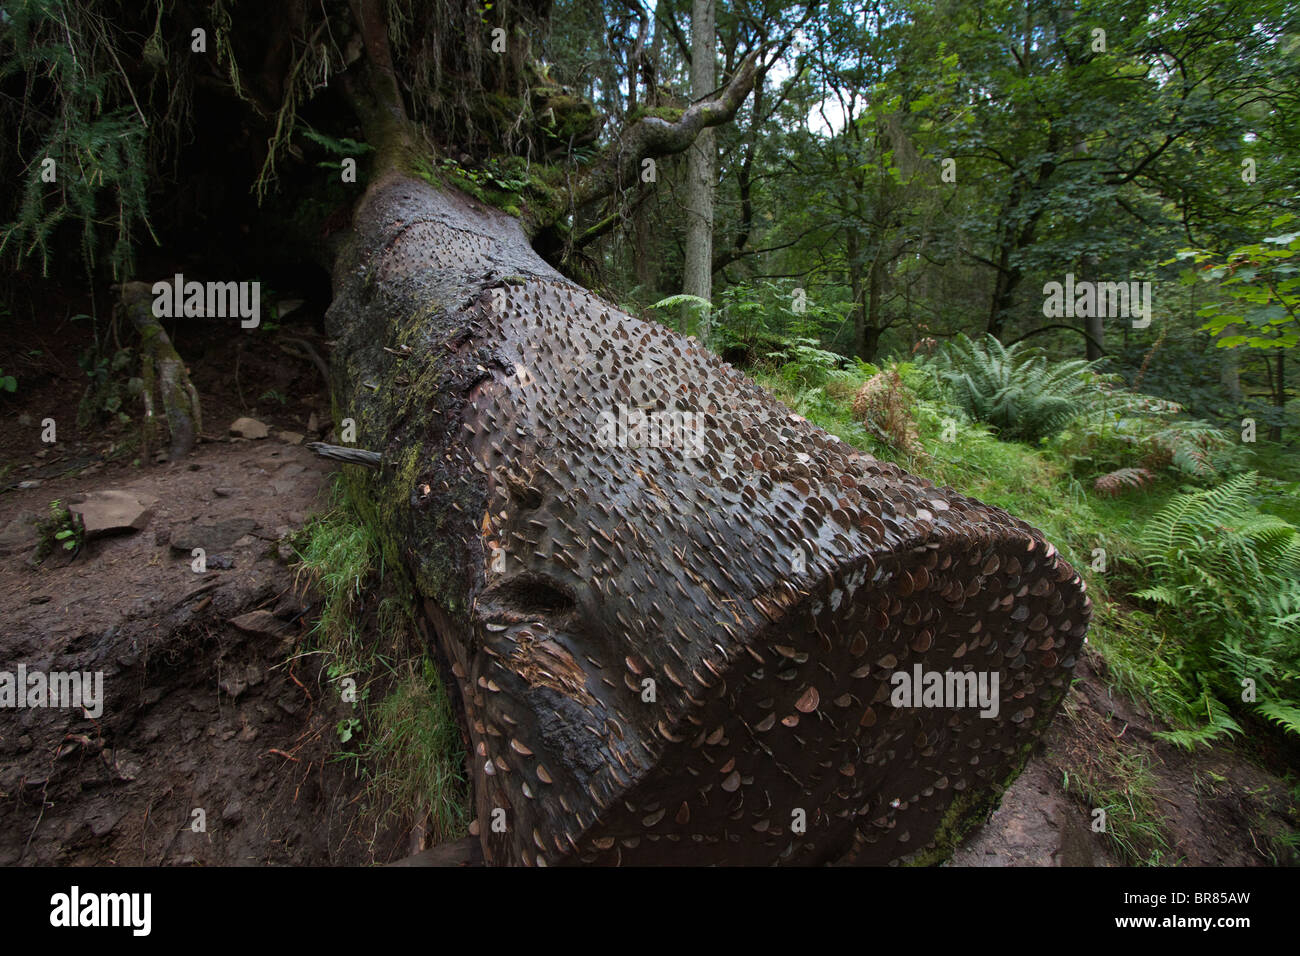 A Money Tree on the edge of Tarn Hows in the Lake District.  Walkers hammer a coin into the tree trunk to bring good luck Stock Photo